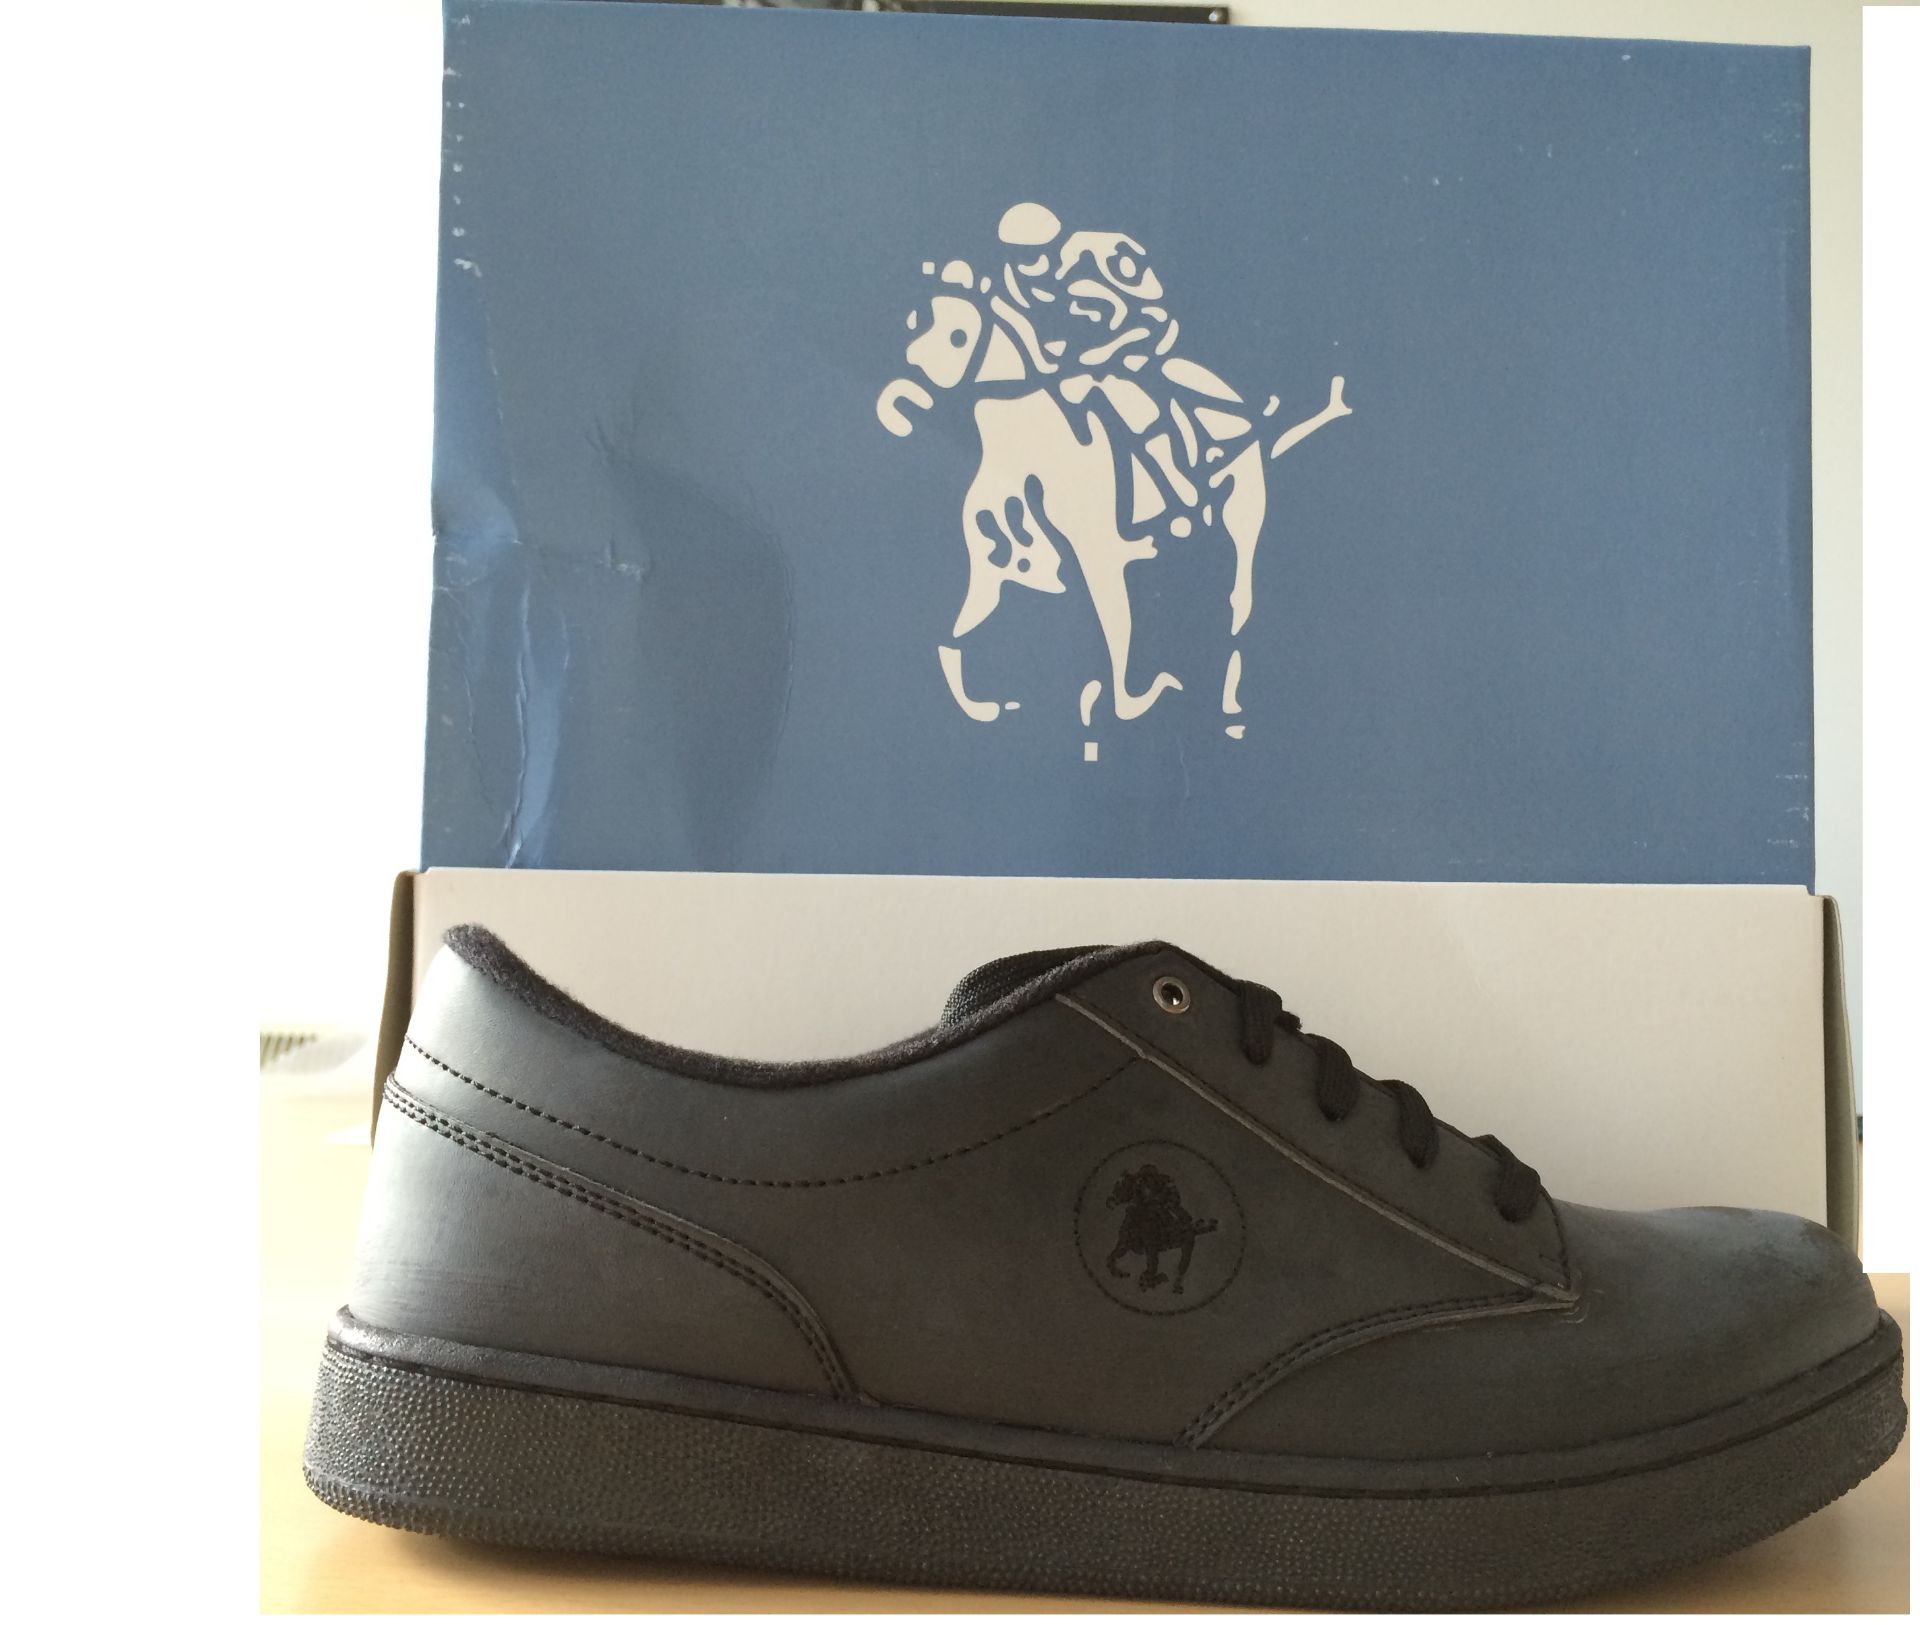 Box To Include Approx. 12 Childrens US Collection Trainers in Black; Children's Sizes 7-10